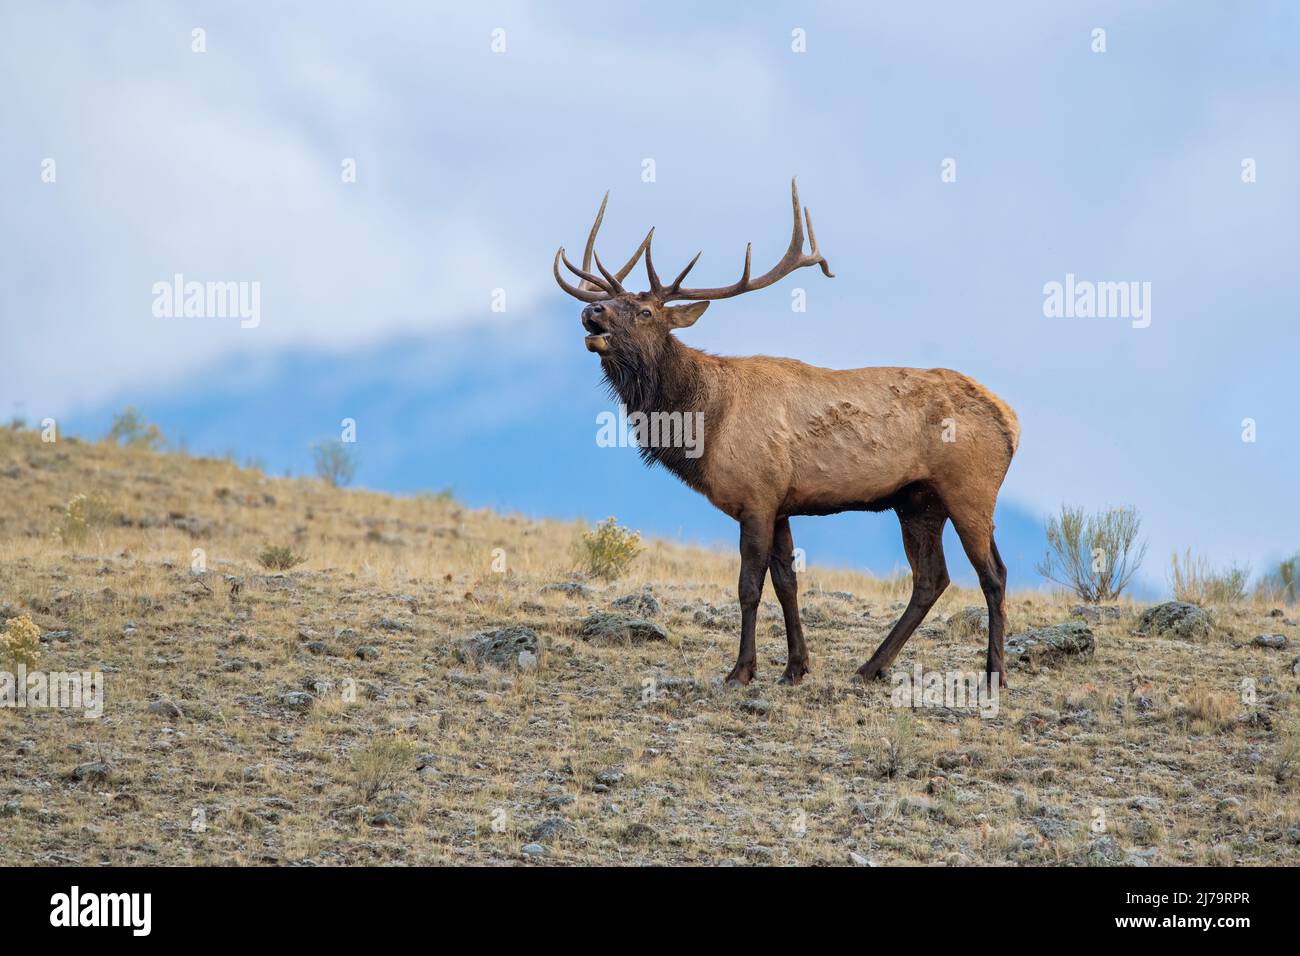 Bull Elk (Cervus canadensis). October in Yellowstone National Park, Wyoming, USA. Stock Photo